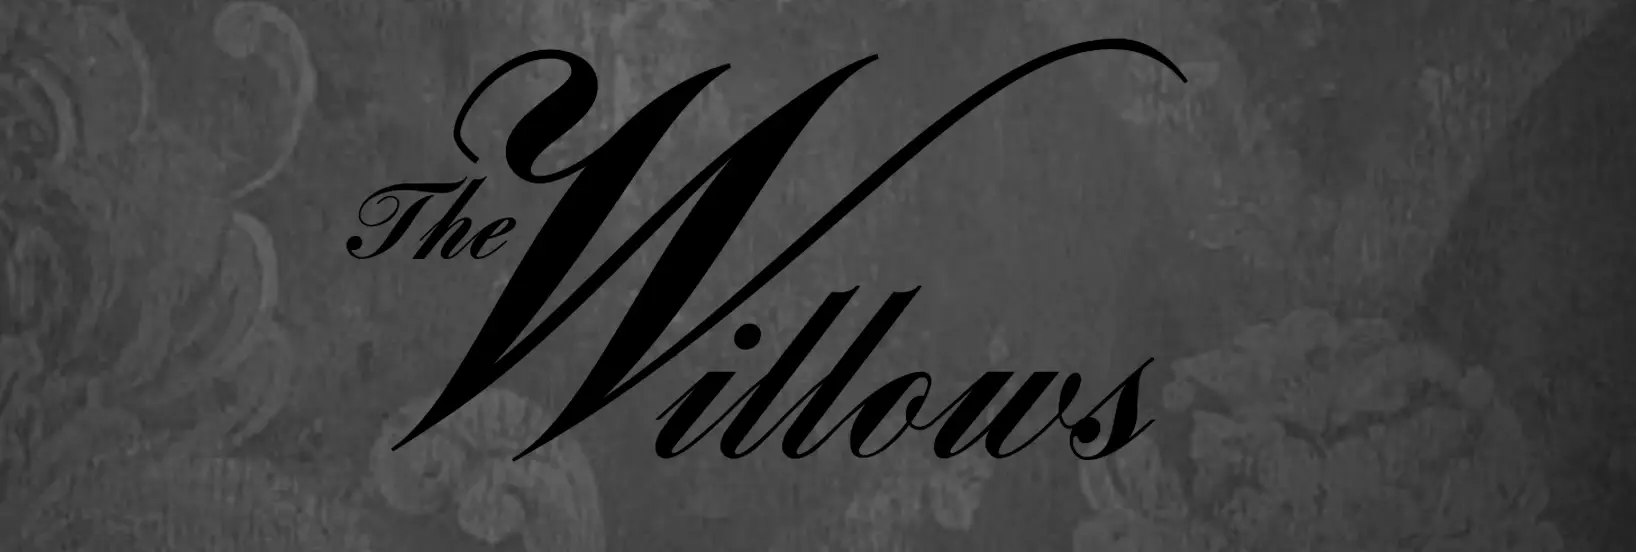 The Willows Justin Fix Interview CreepLA Horror Immersive Theater Year Round Haunt